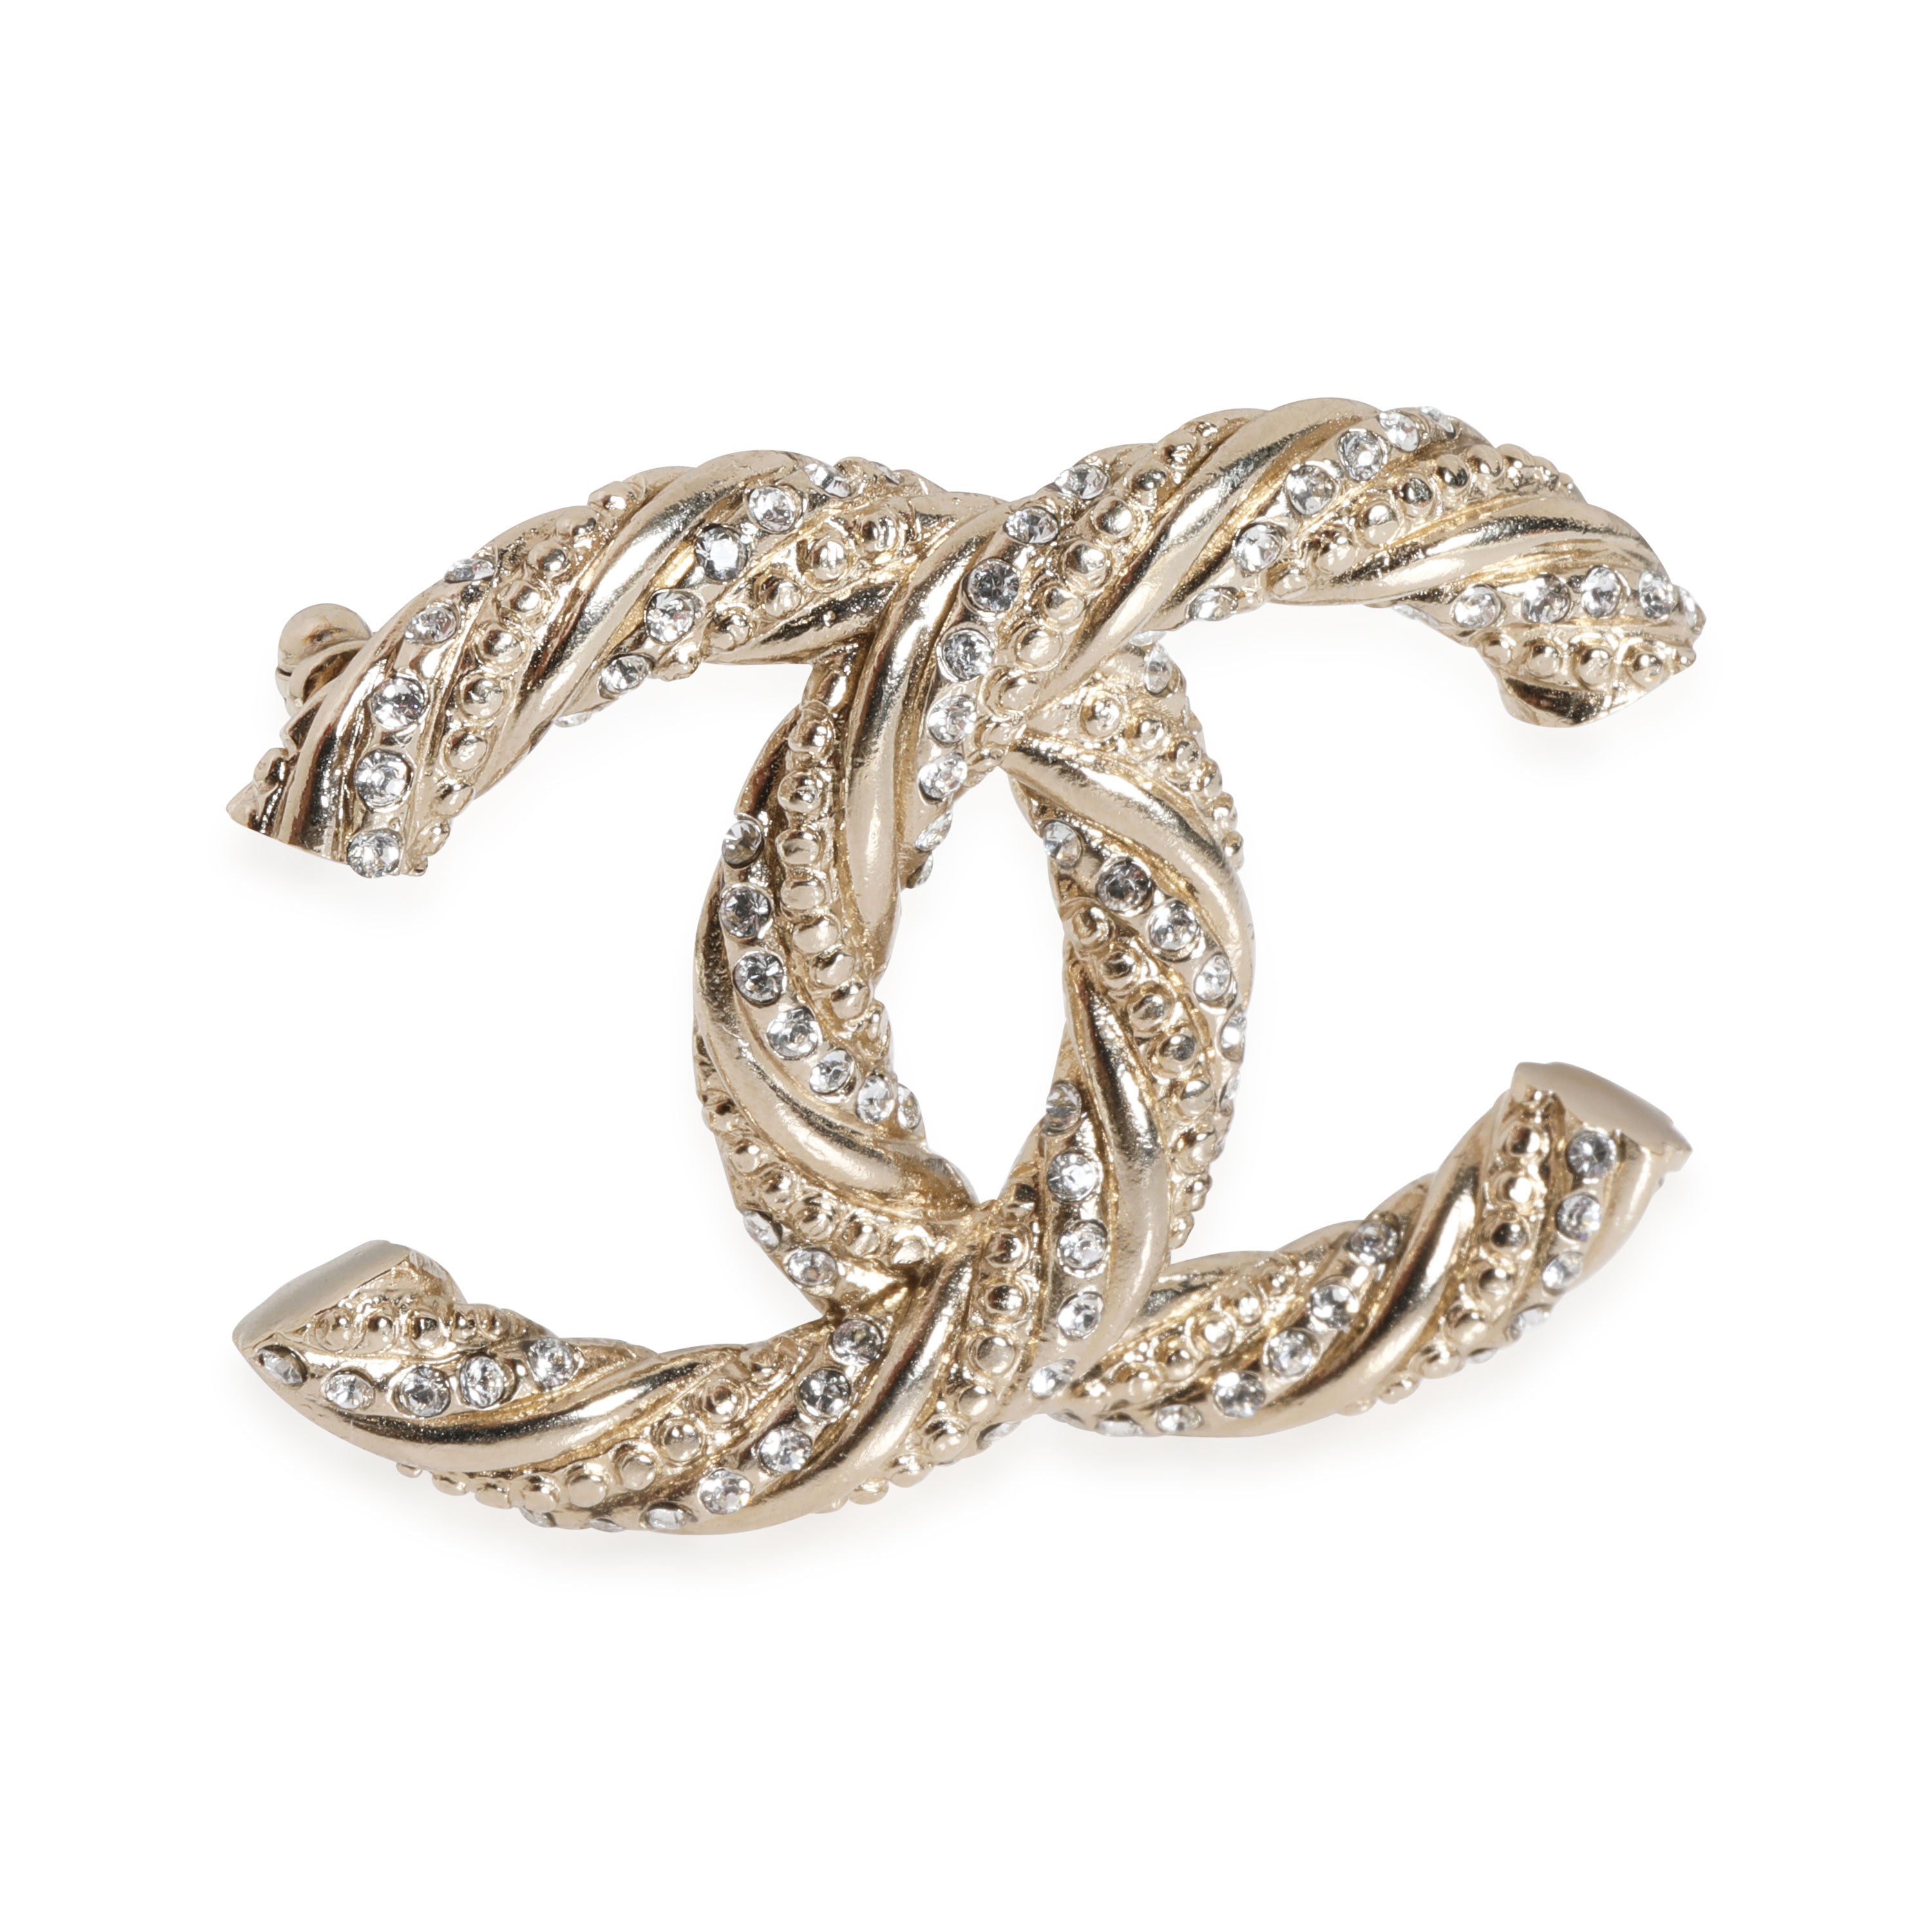 CC-CHANEL Inspired Twisted Goldtone Brooch